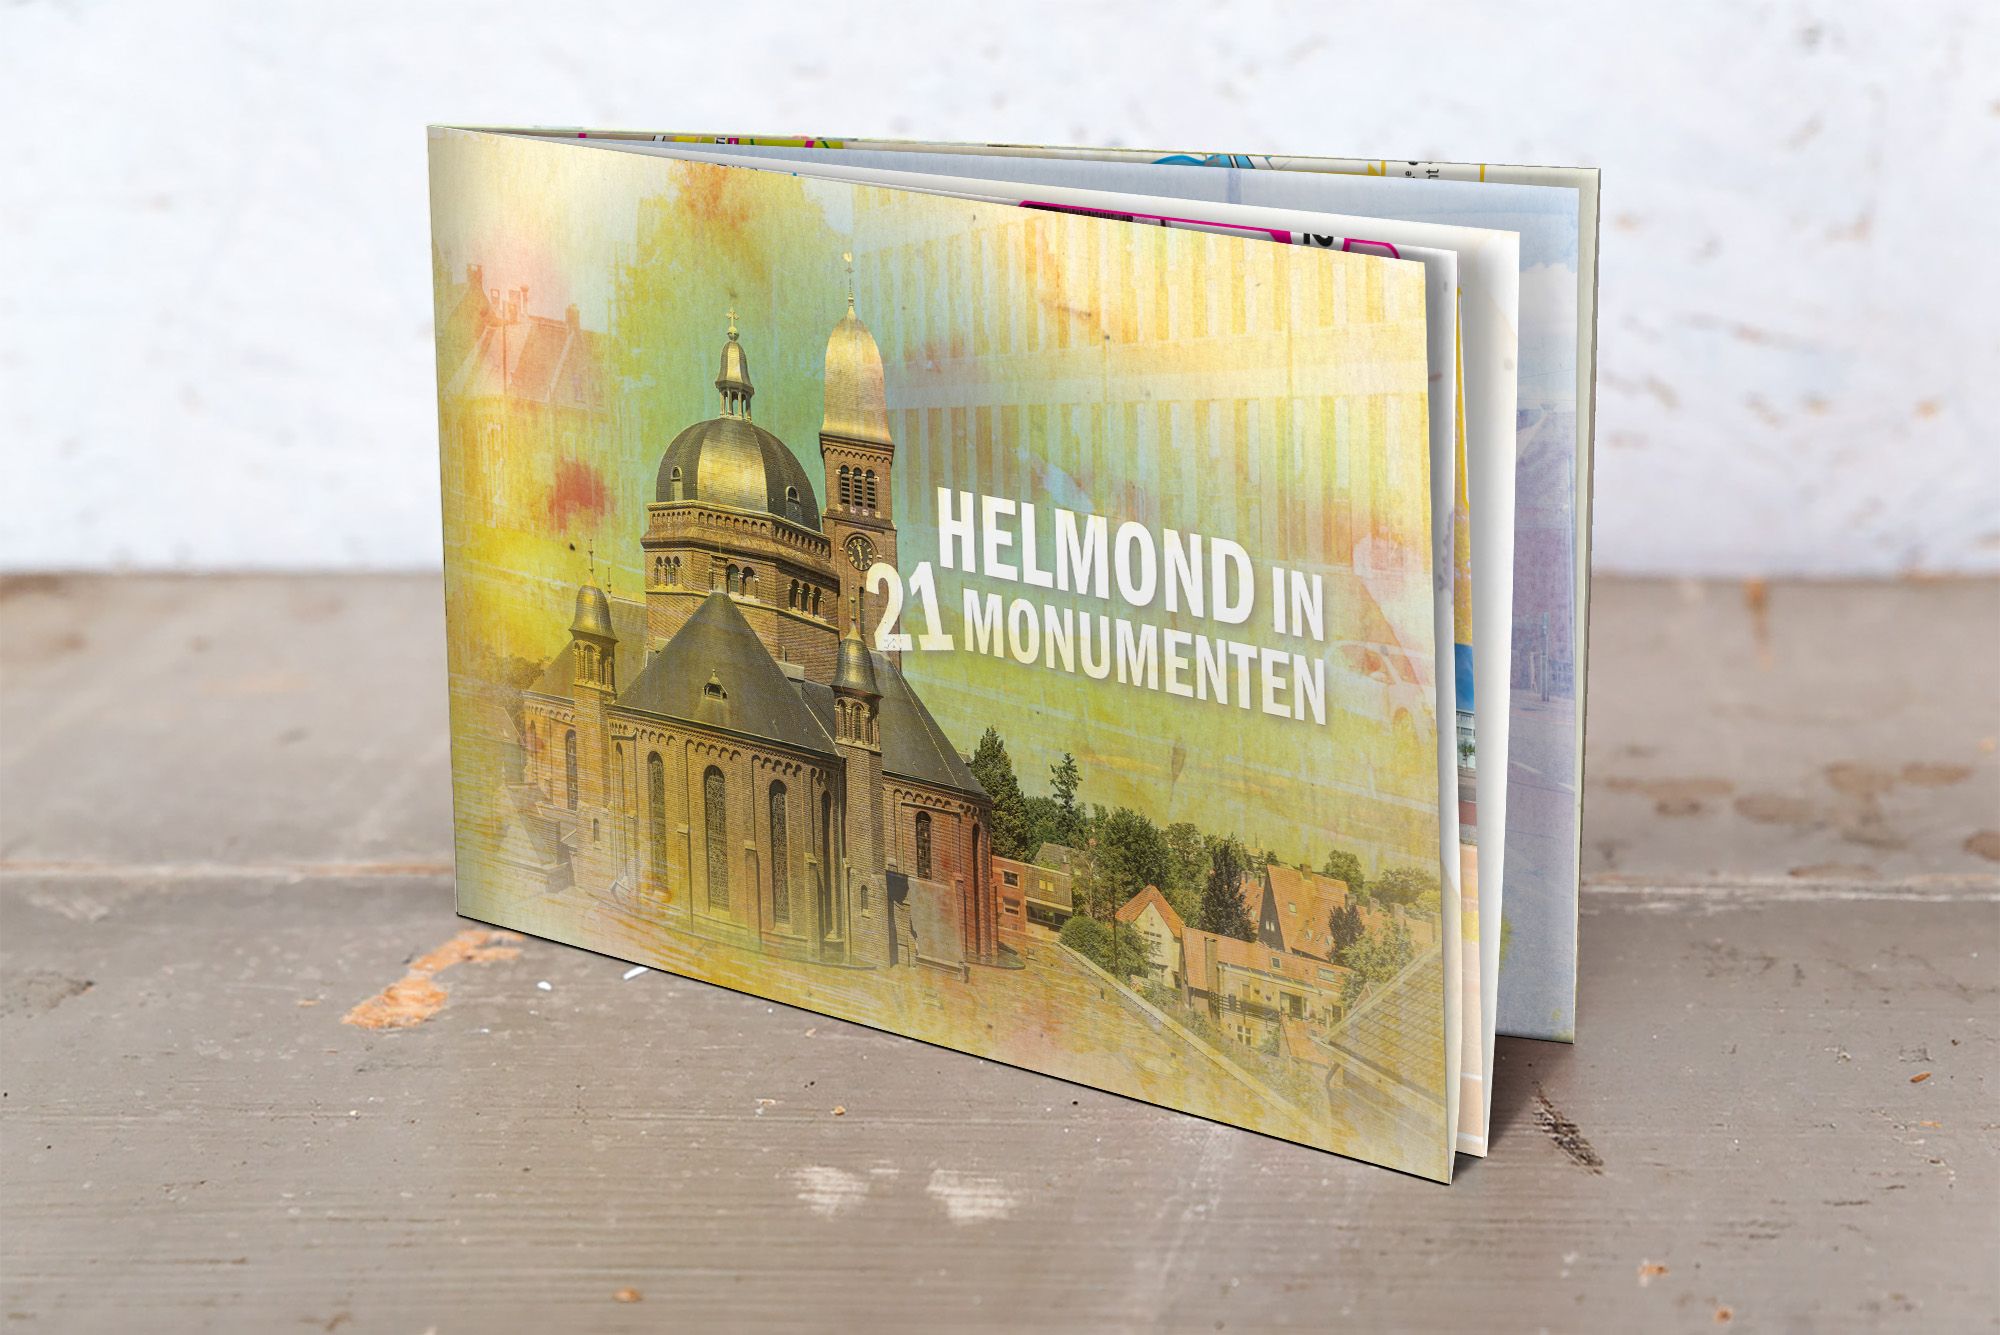 Helmond in 21 monuments cover